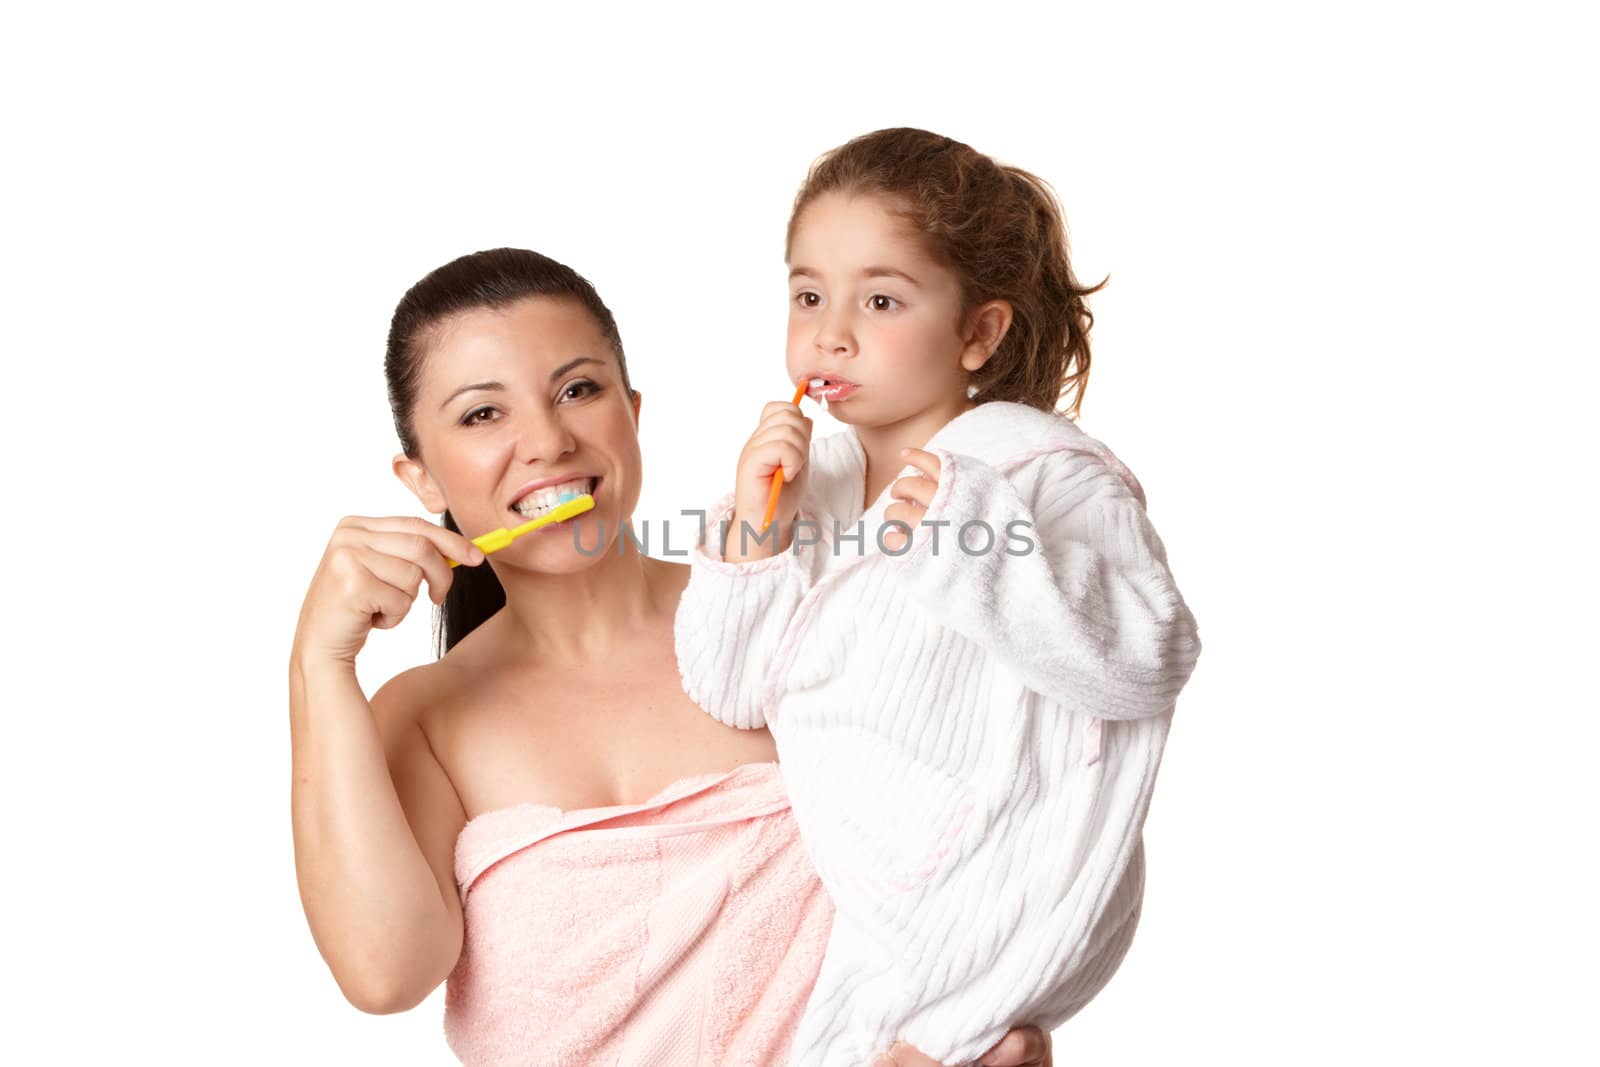 A mother and daughter brushing teeth using toothbrushes and aqua coloured mint flavoured toothpaste.  